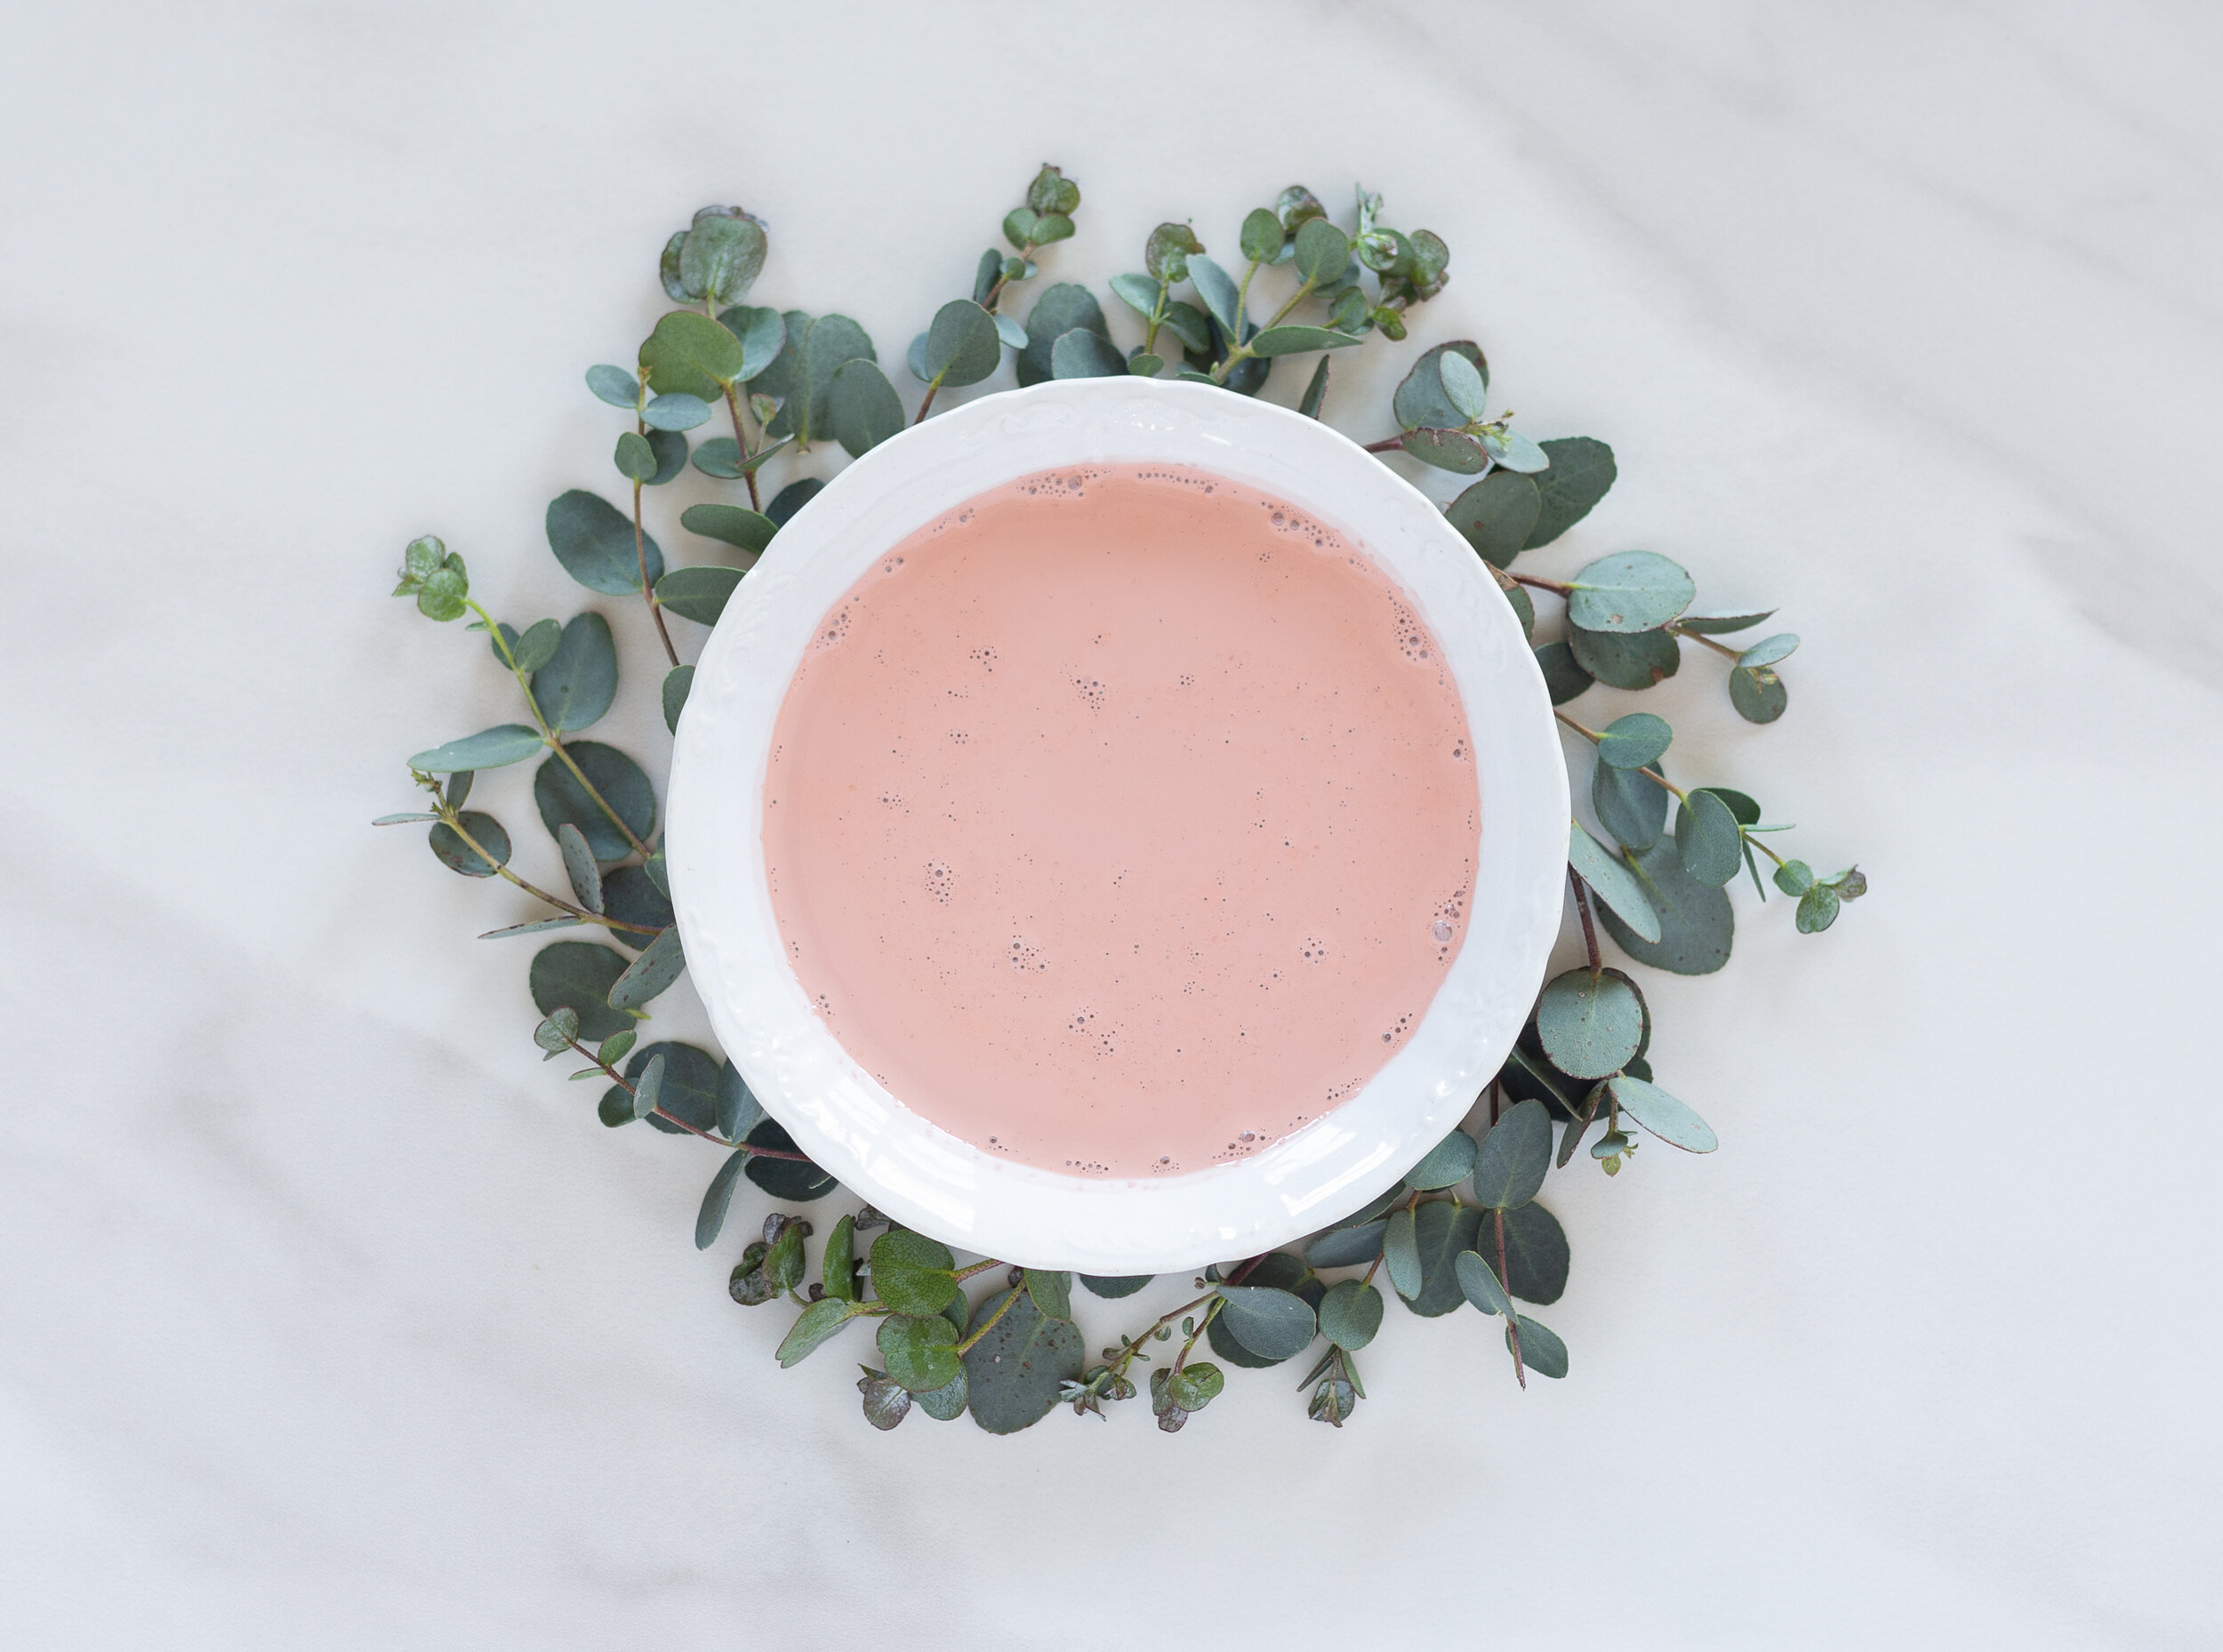 Arabesque by Miss Mustard Seed’s® Milk Paint in bowl surrounded by eucalyptus branches